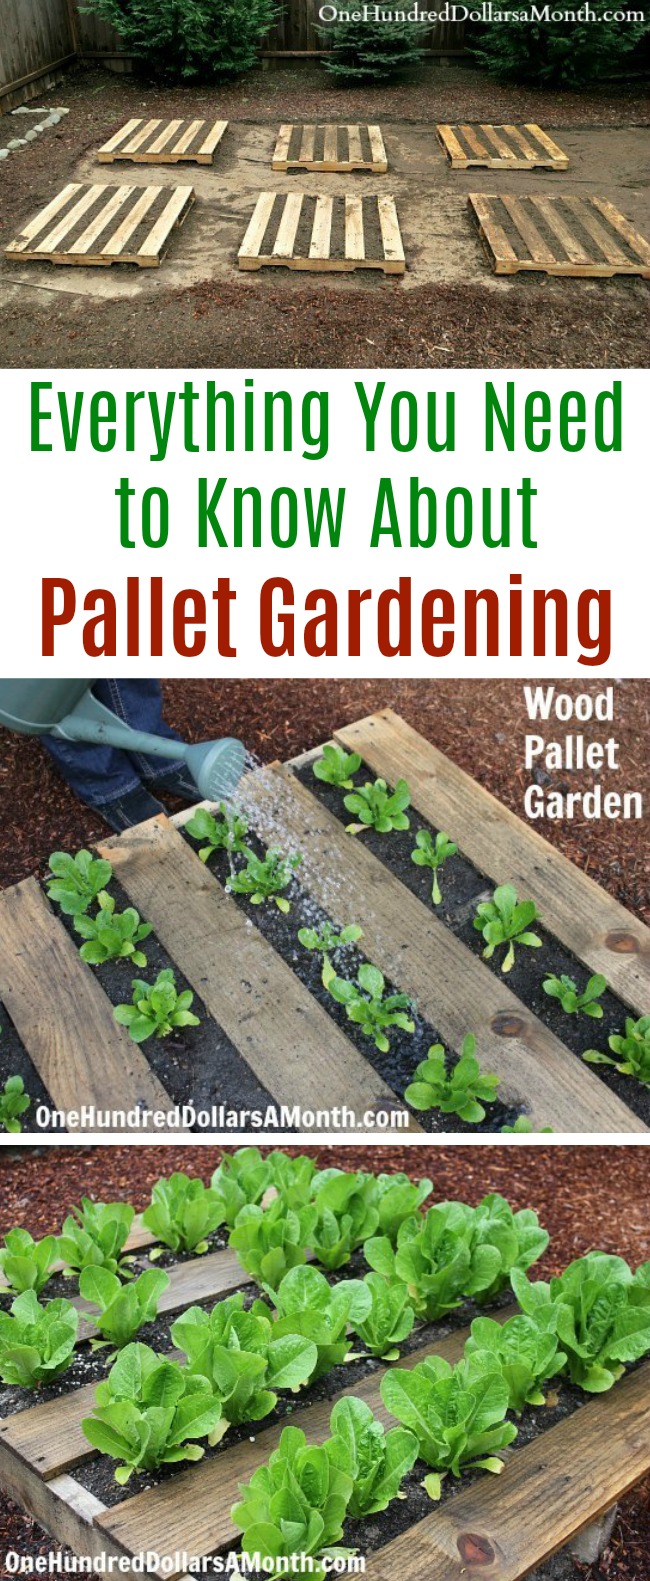 Everything You Need to Know About Pallet Gardening